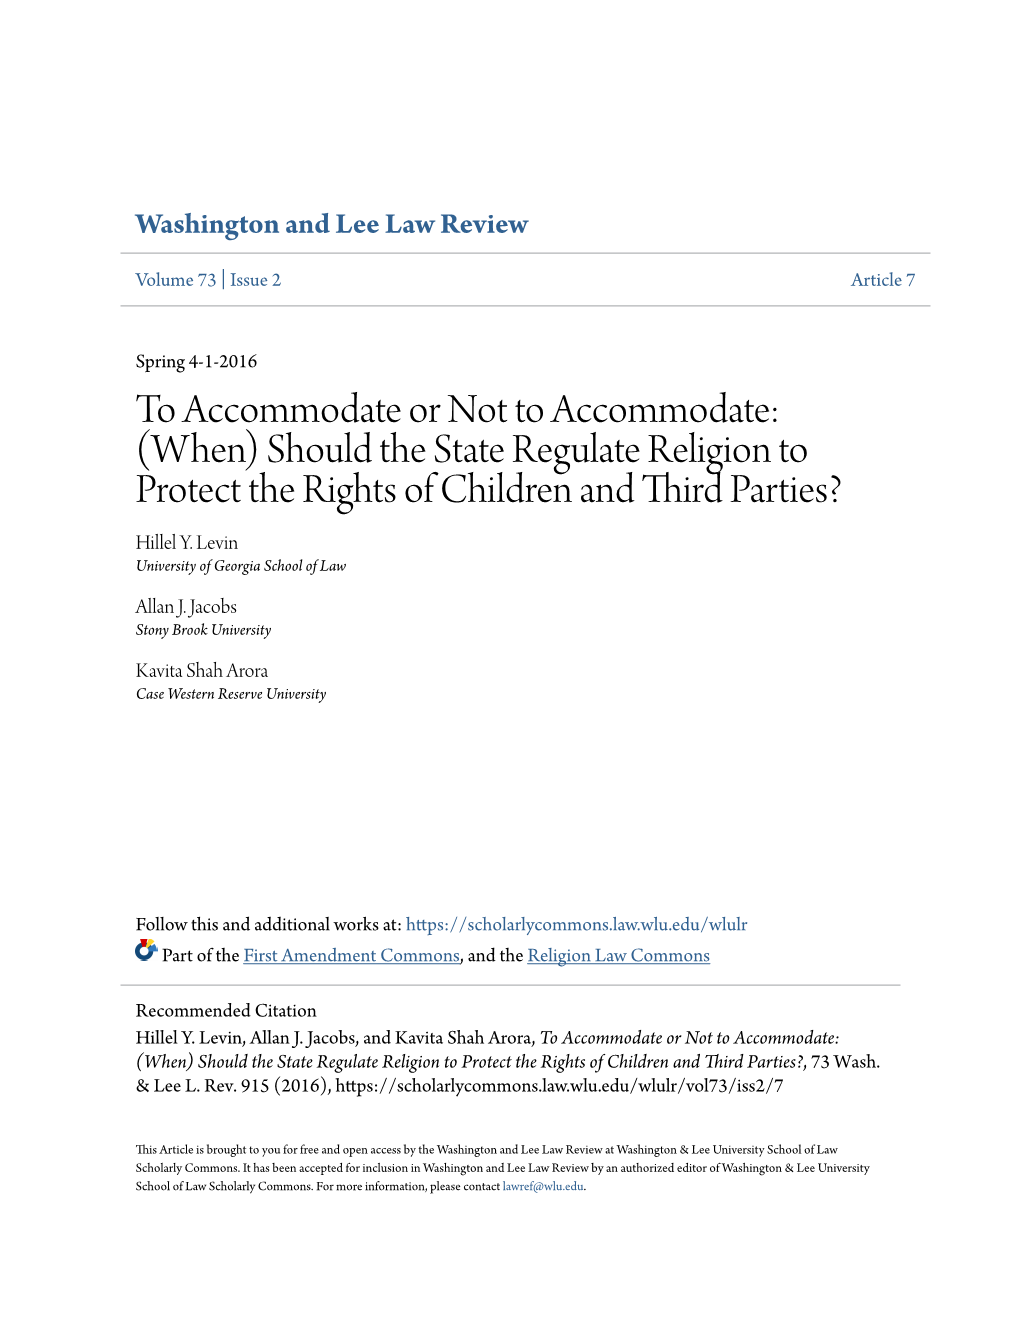 Should the State Regulate Religion to Protect the Rights of Children and Third Parties? Hillel Y